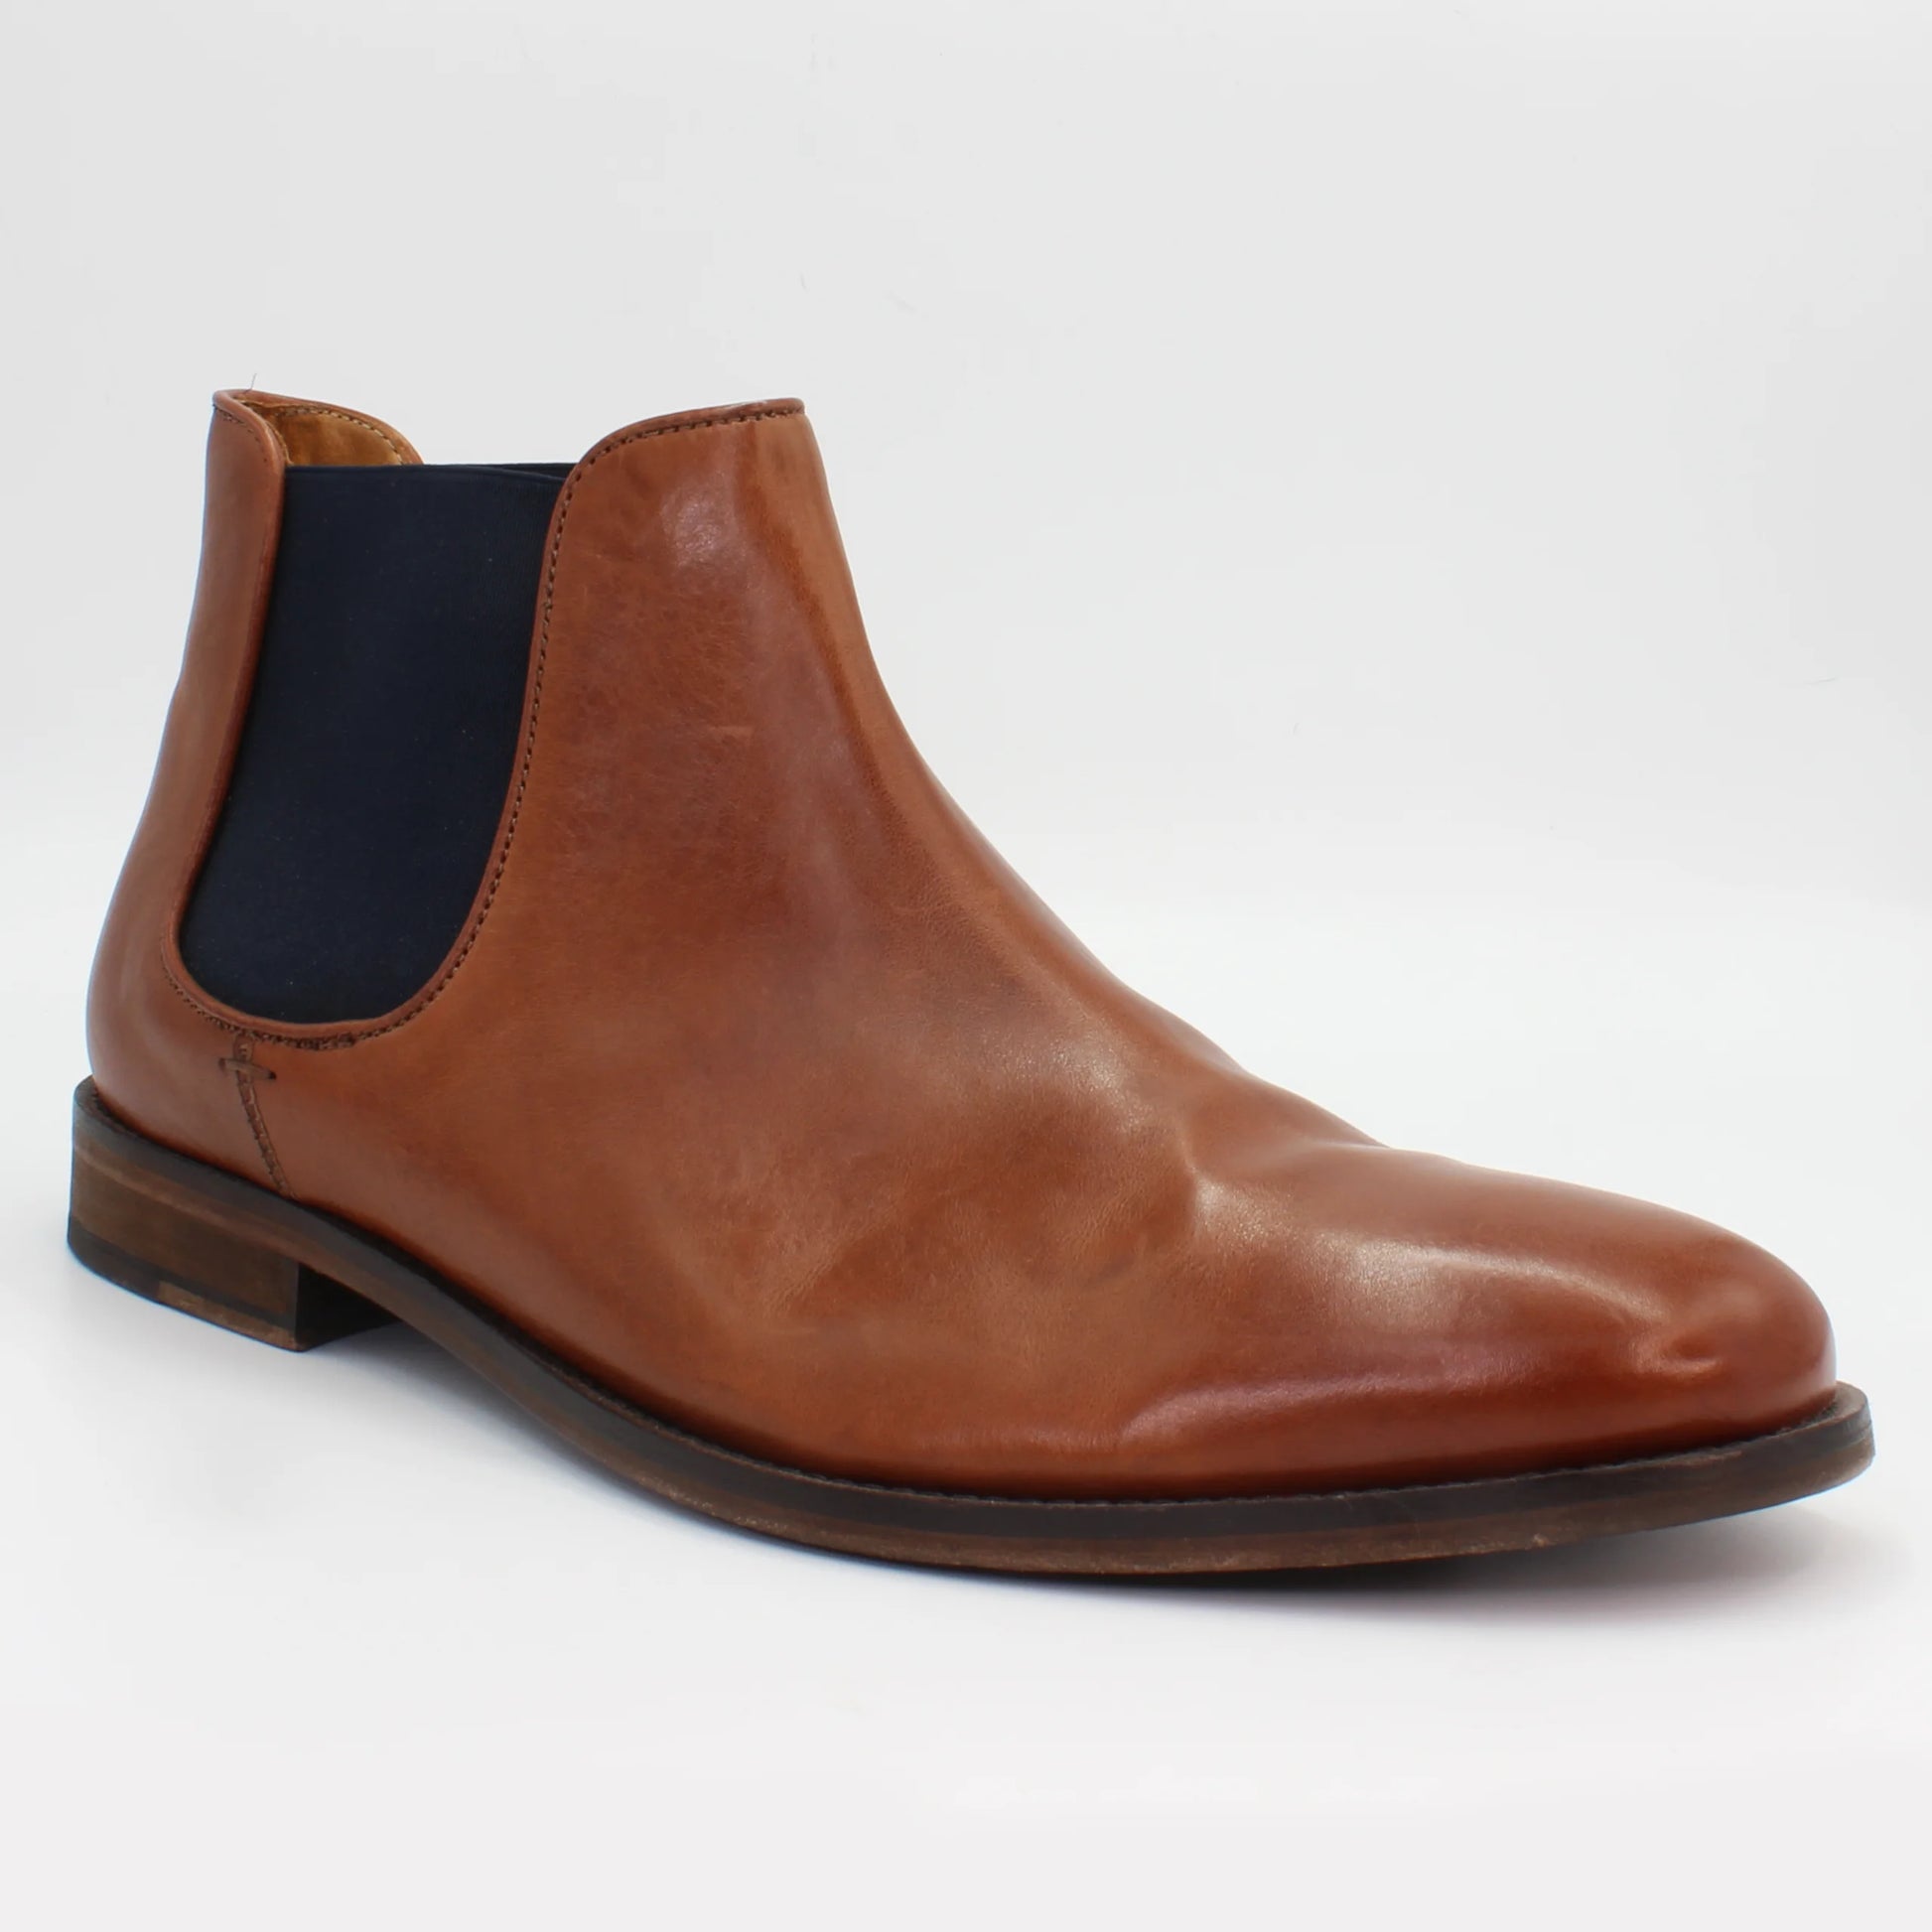 Men's Chelsea Boot. Genuine calf leather upper and leather sole. Made in Italy.